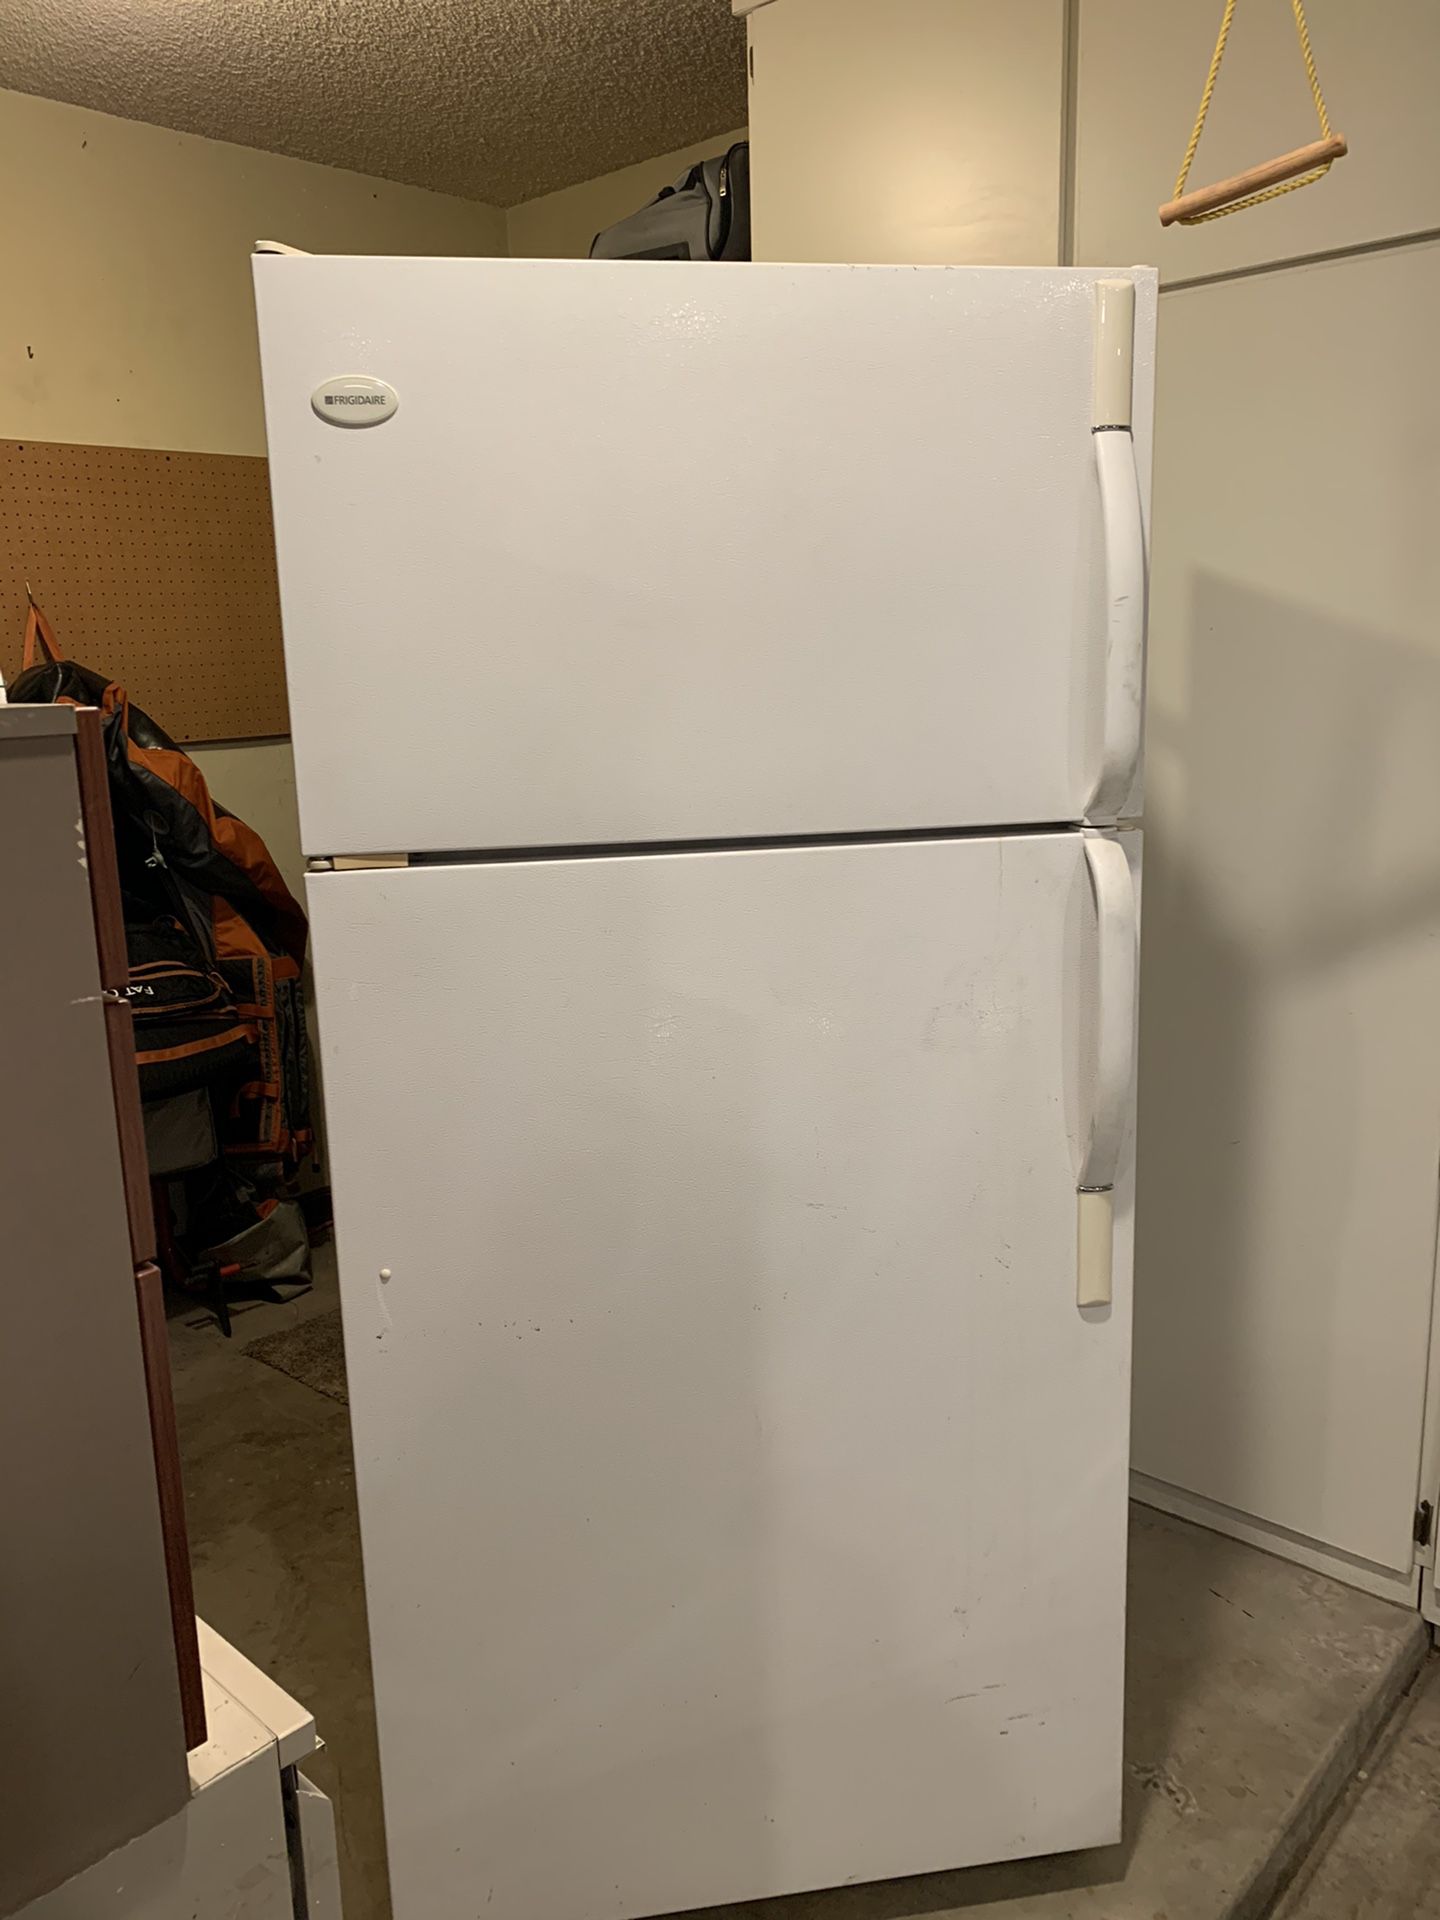 FREE!!! Refrigerator for pick up. Working.